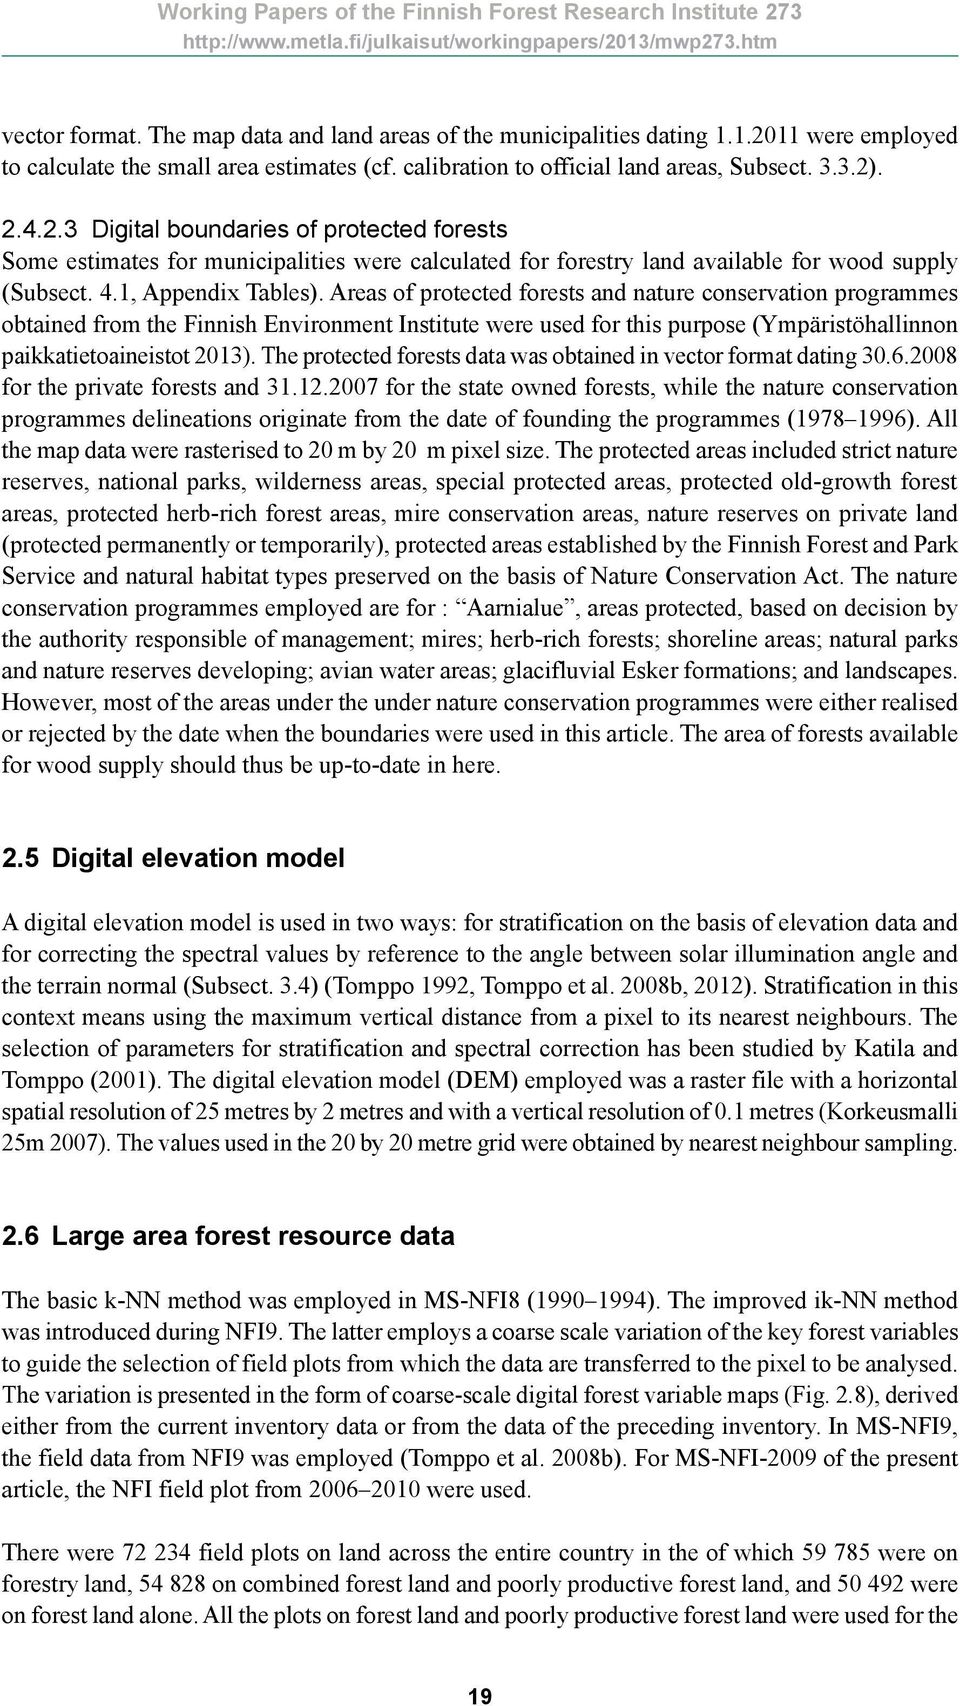 . 2.4.2.3 Digital boundaries of protected forests Some estimates for municipalities were calculated for forestry land available for wood supply (Subsect. 4.1, Appendix Tables).